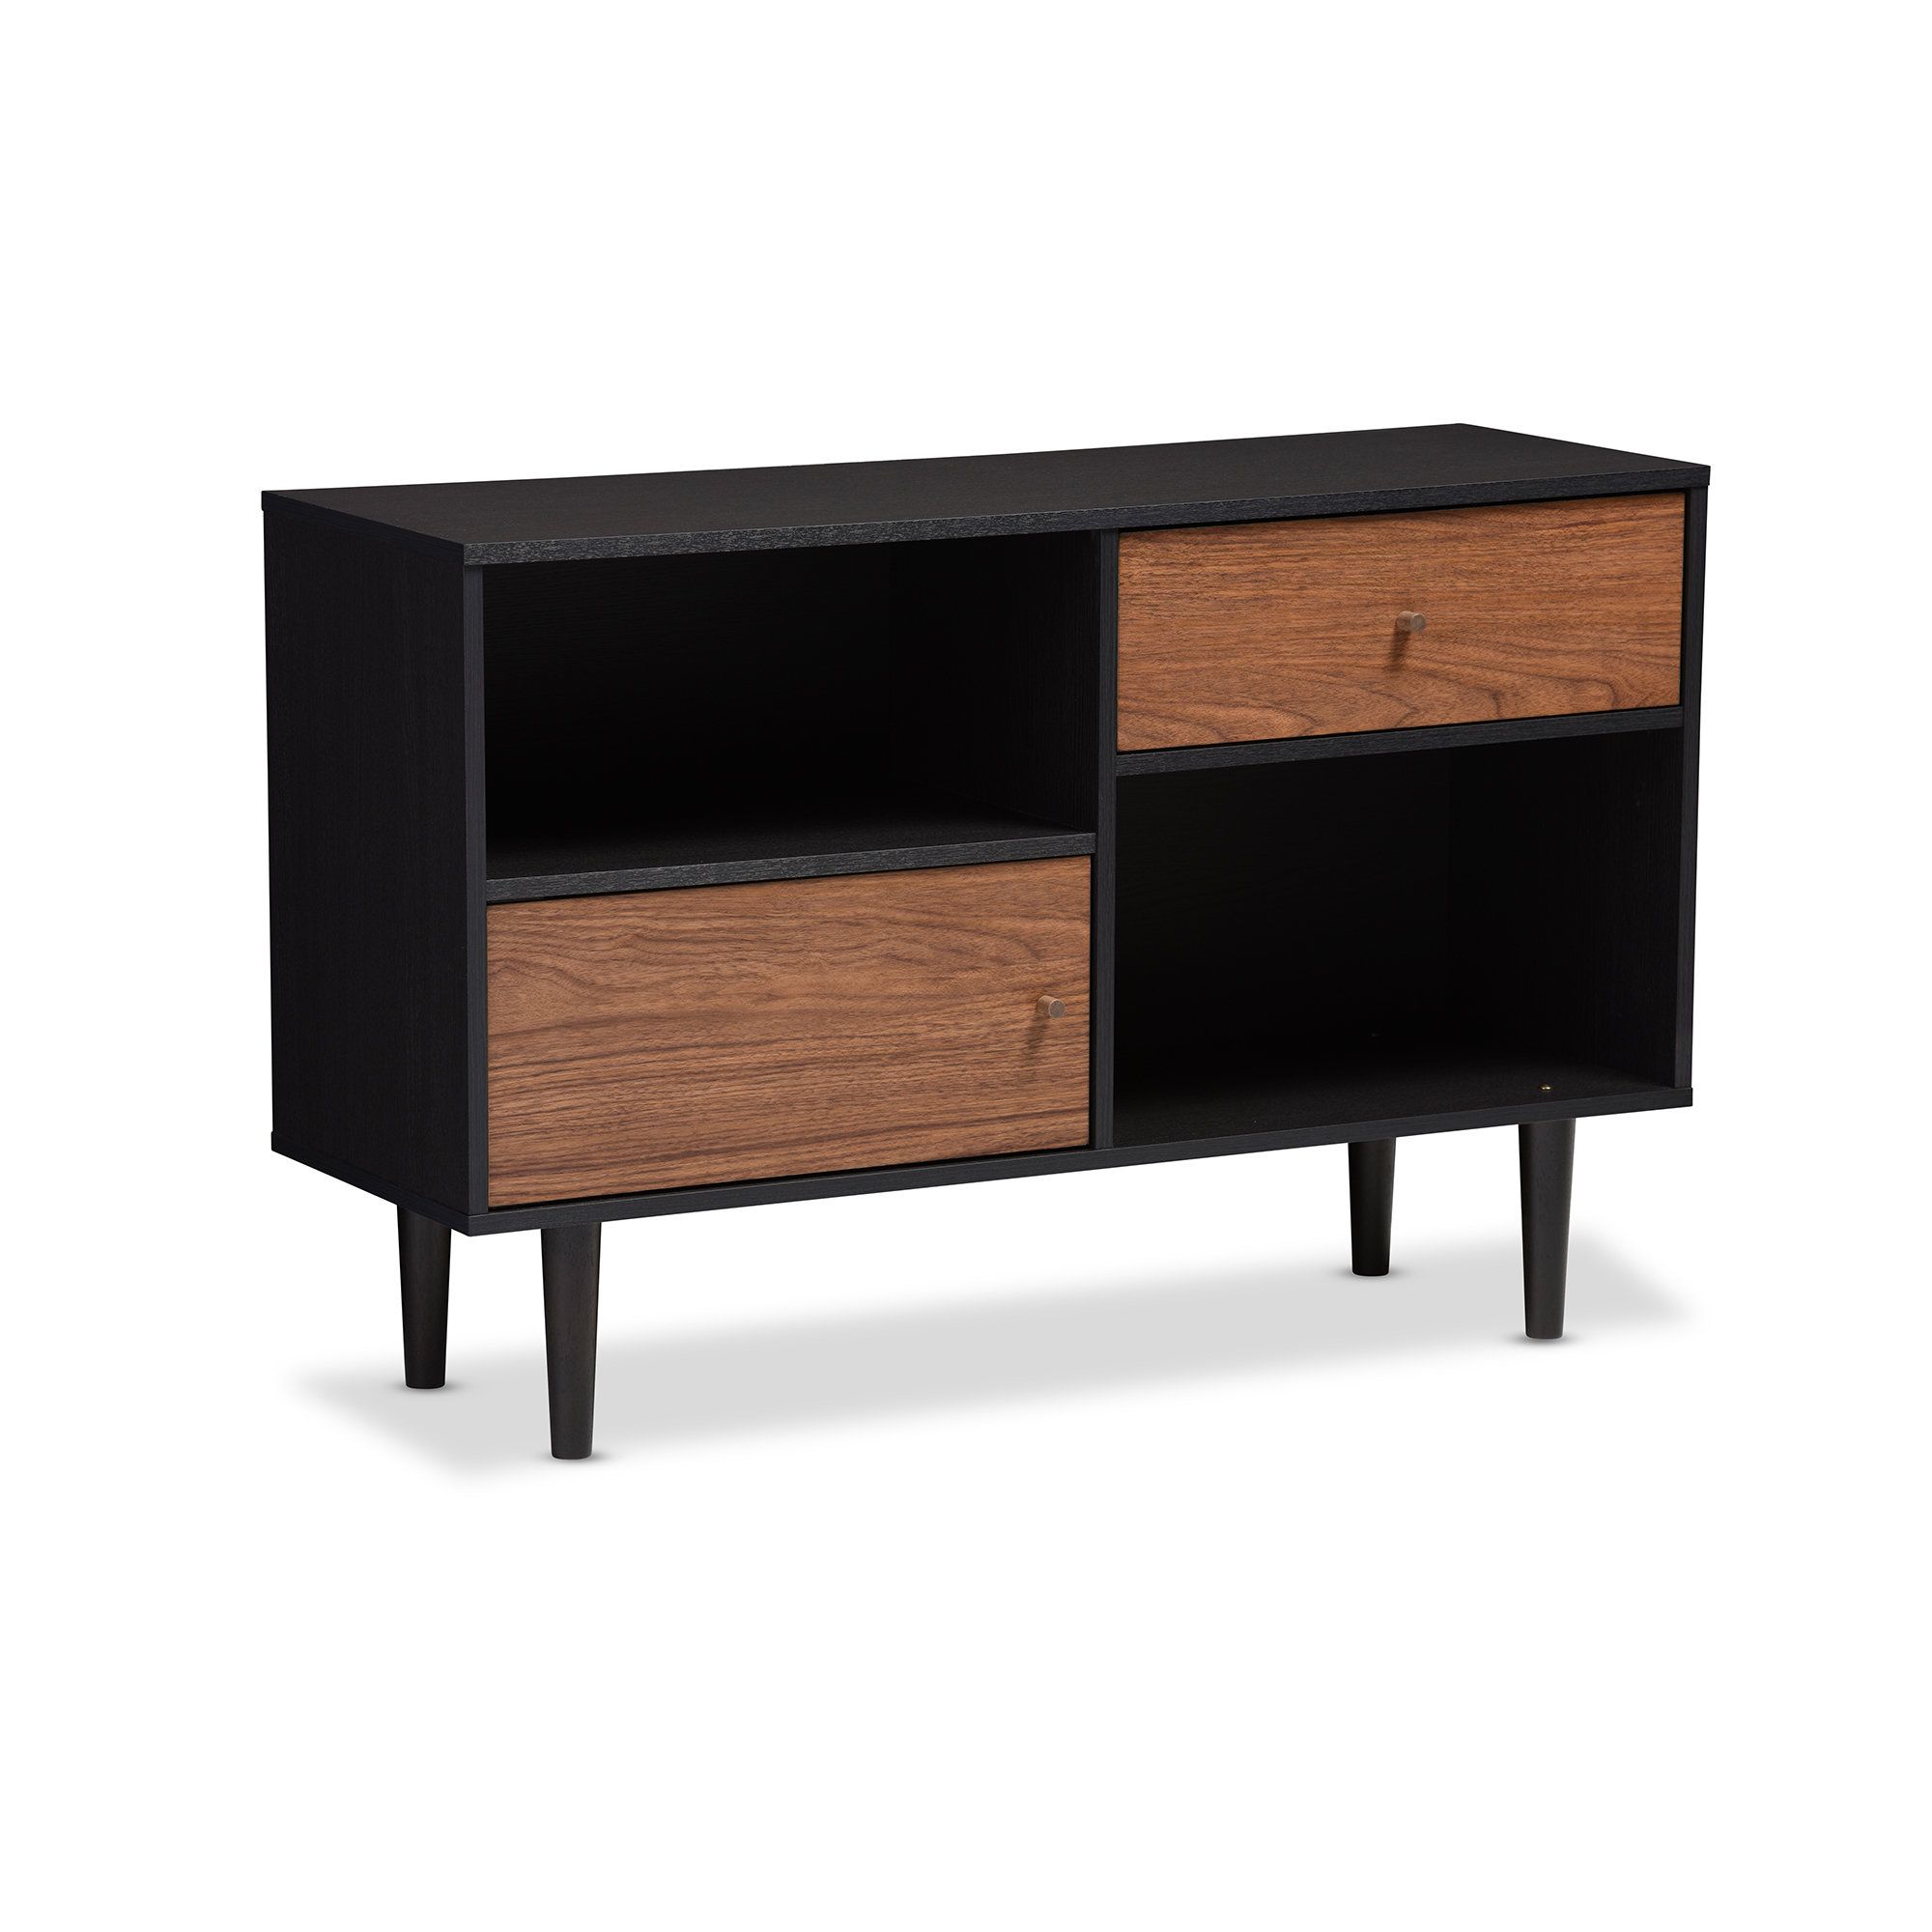 Modern Mid Century Sideboards | Allmodern Inside Dovray Sideboards (View 11 of 20)